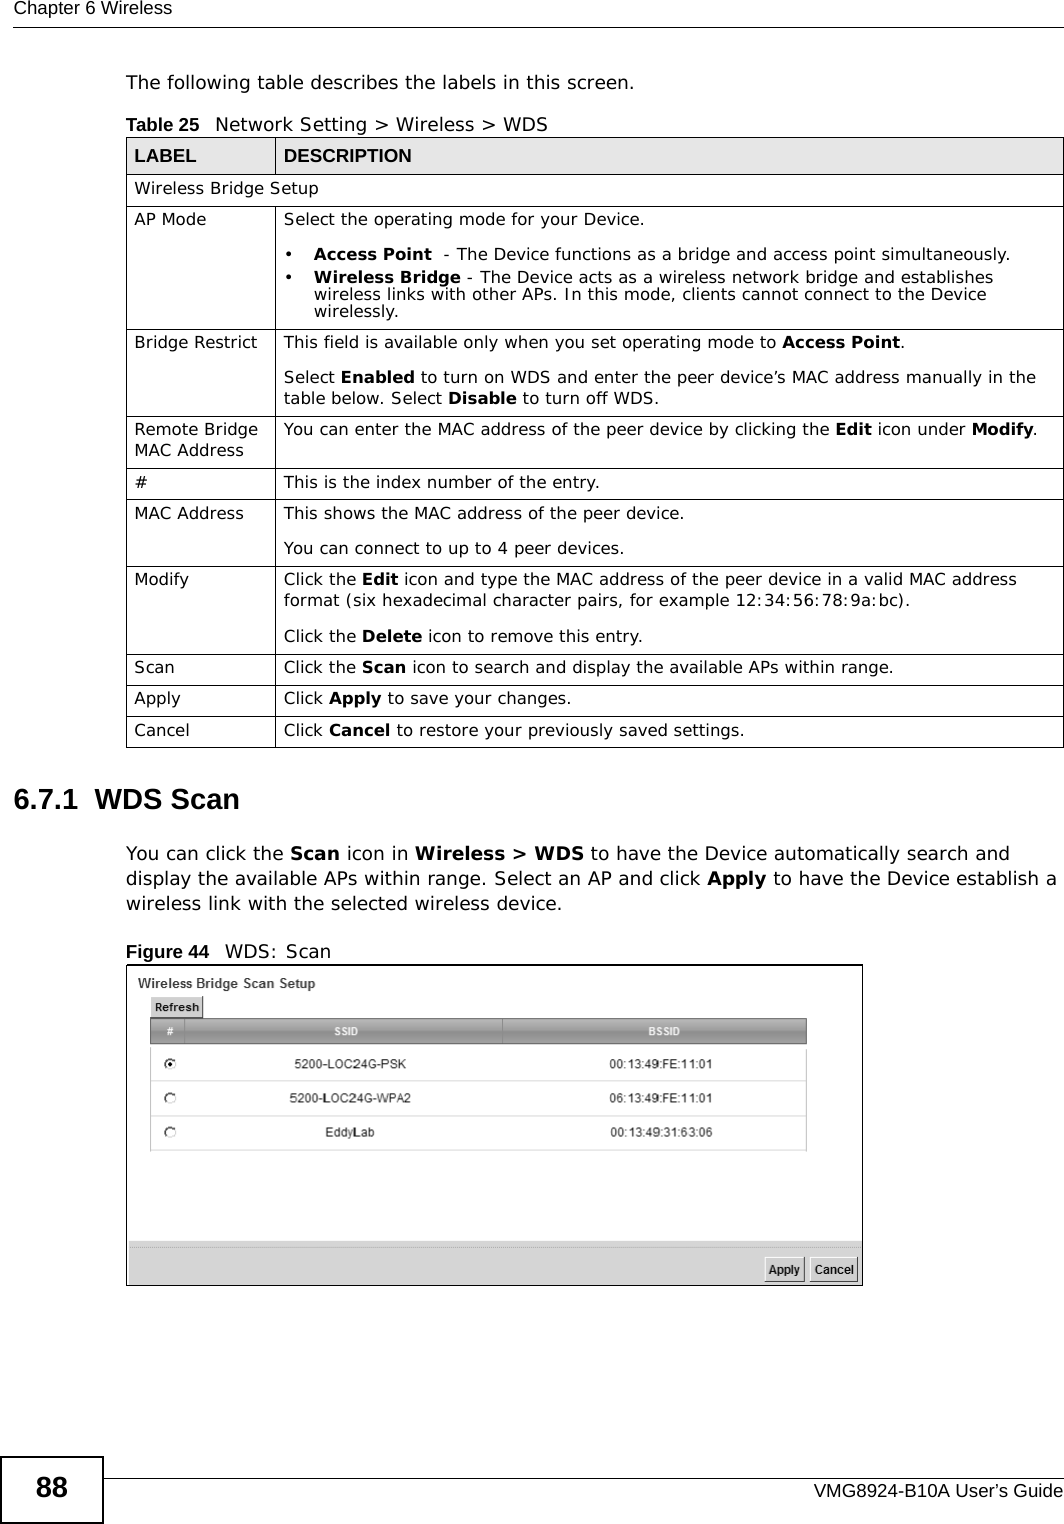 Chapter 6 WirelessVMG8924-B10A User’s Guide88The following table describes the labels in this screen.6.7.1  WDS ScanYou can click the Scan icon in Wireless &gt; WDS to have the Device automatically search and display the available APs within range. Select an AP and click Apply to have the Device establish a wireless link with the selected wireless device. Figure 44   WDS: ScanTable 25   Network Setting &gt; Wireless &gt; WDSLABEL DESCRIPTIONWireless Bridge SetupAP Mode Select the operating mode for your Device.•Access Point  - The Device functions as a bridge and access point simultaneously. •Wireless Bridge - The Device acts as a wireless network bridge and establishes wireless links with other APs. In this mode, clients cannot connect to the Device wirelessly.Bridge Restrict This field is available only when you set operating mode to Access Point.Select Enabled to turn on WDS and enter the peer device’s MAC address manually in the table below. Select Disable to turn off WDS.Remote Bridge MAC Address You can enter the MAC address of the peer device by clicking the Edit icon under Modify. # This is the index number of the entry.MAC Address This shows the MAC address of the peer device. You can connect to up to 4 peer devices.Modify Click the Edit icon and type the MAC address of the peer device in a valid MAC address format (six hexadecimal character pairs, for example 12:34:56:78:9a:bc).Click the Delete icon to remove this entry.Scan Click the Scan icon to search and display the available APs within range.Apply Click Apply to save your changes.Cancel Click Cancel to restore your previously saved settings.